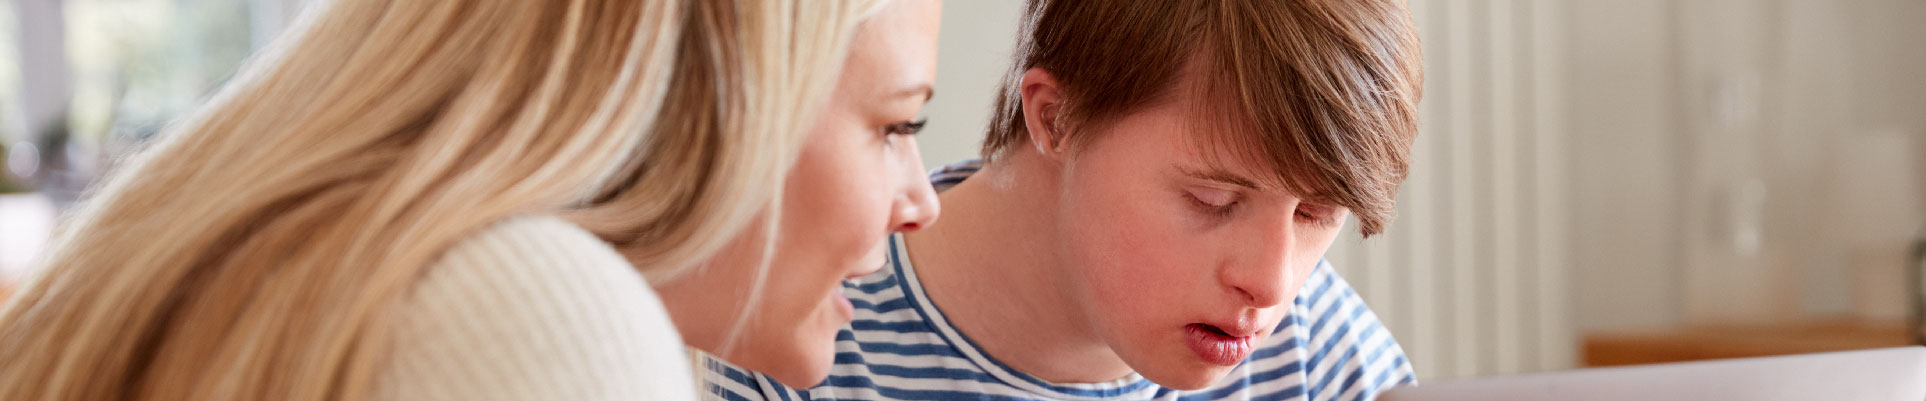 A woman tutoring a participant with down syndrome